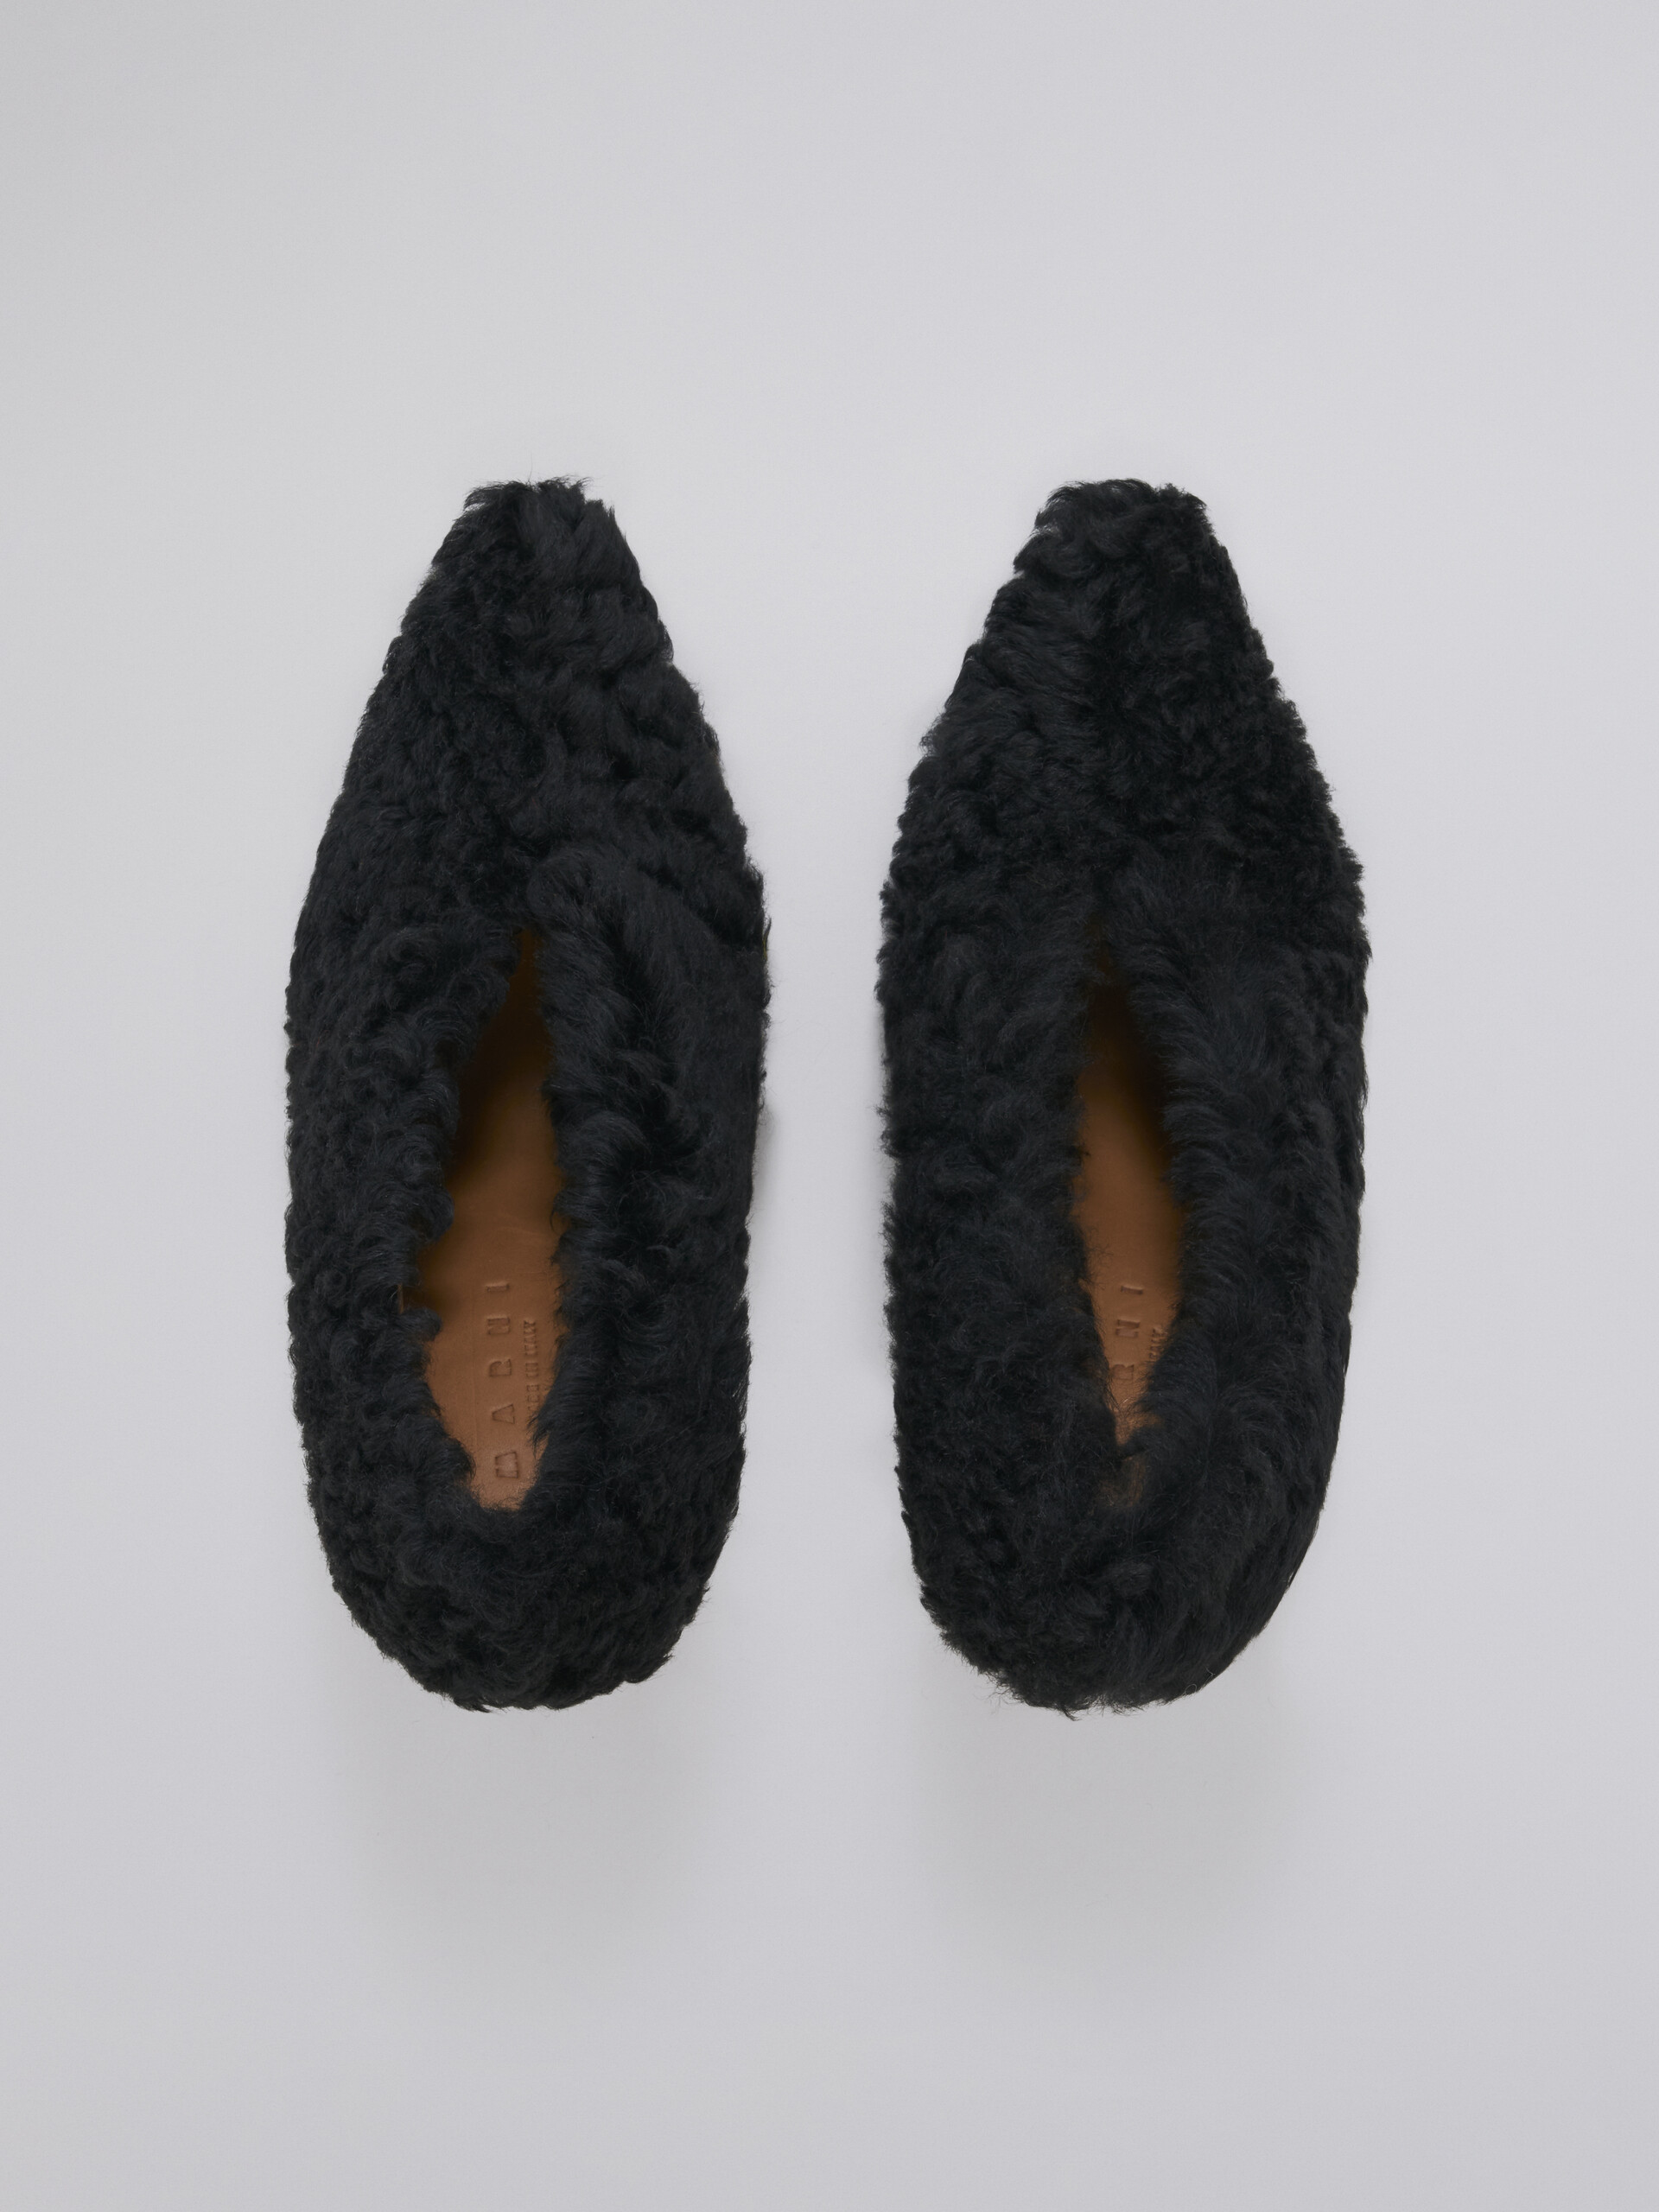 Shearling pump with heel covered in nappa - Pumps - Image 4